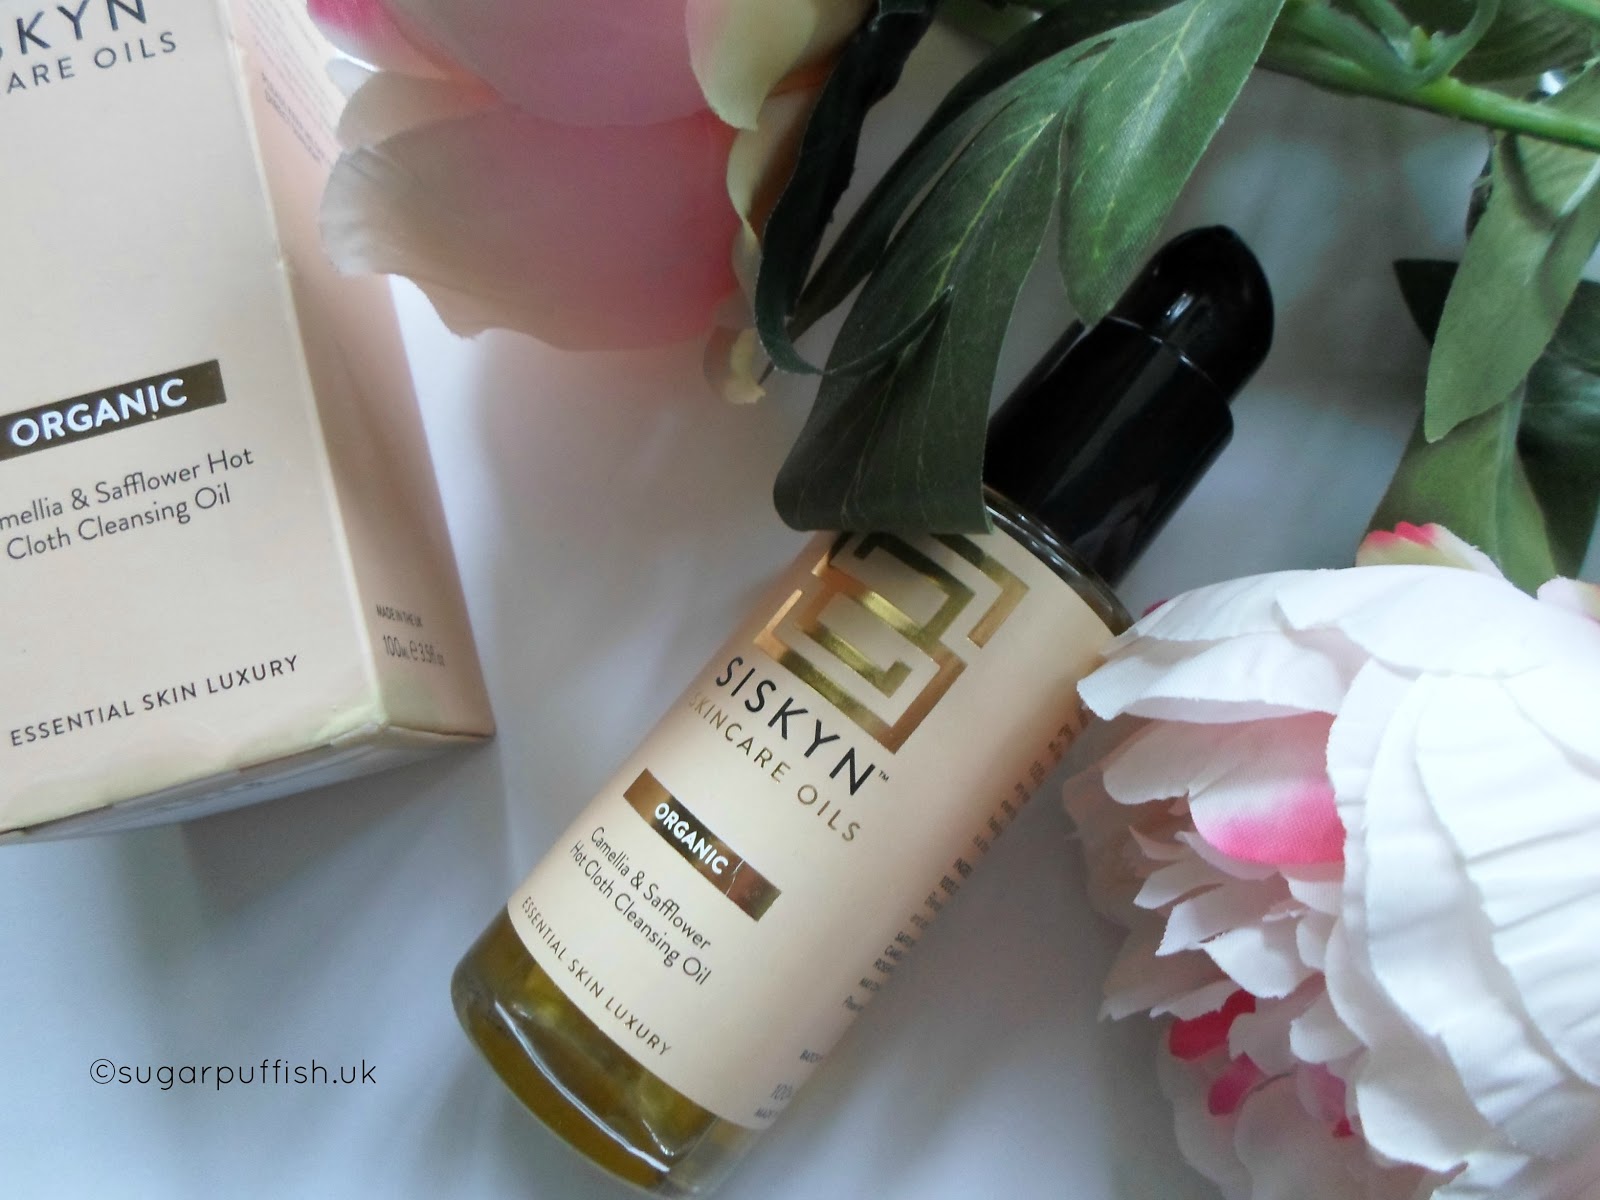 Review Siskyn Skincare Oils Camellia & Safflower Hot Cloth Cleansing Oil